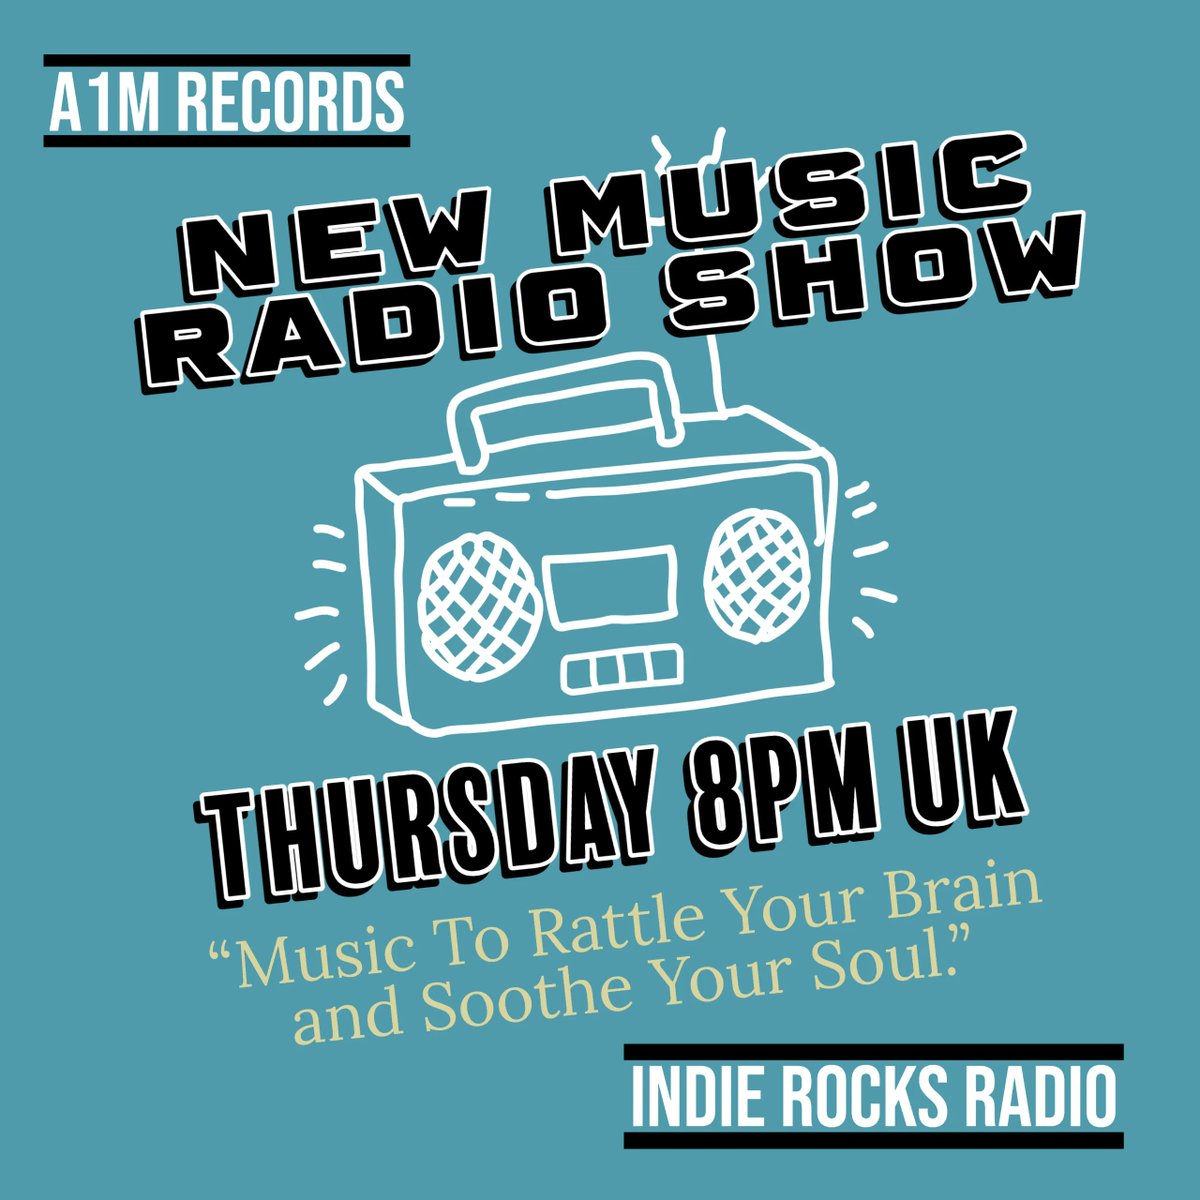 #Onair Trust in Me #PRIVATELIVES @FeeLitRecords ON @A1mradioshow @thetrustedband @Heavylungsband @ChesterDoomBand @BlitzUnion @mothloop1 @ChurchhillThe @DrivenSnowMusic @pmadtheband @daskapitansband @IndifferentM @TheMetalByrds @theferalkings @the_tumbling @paTChwOrkdOts